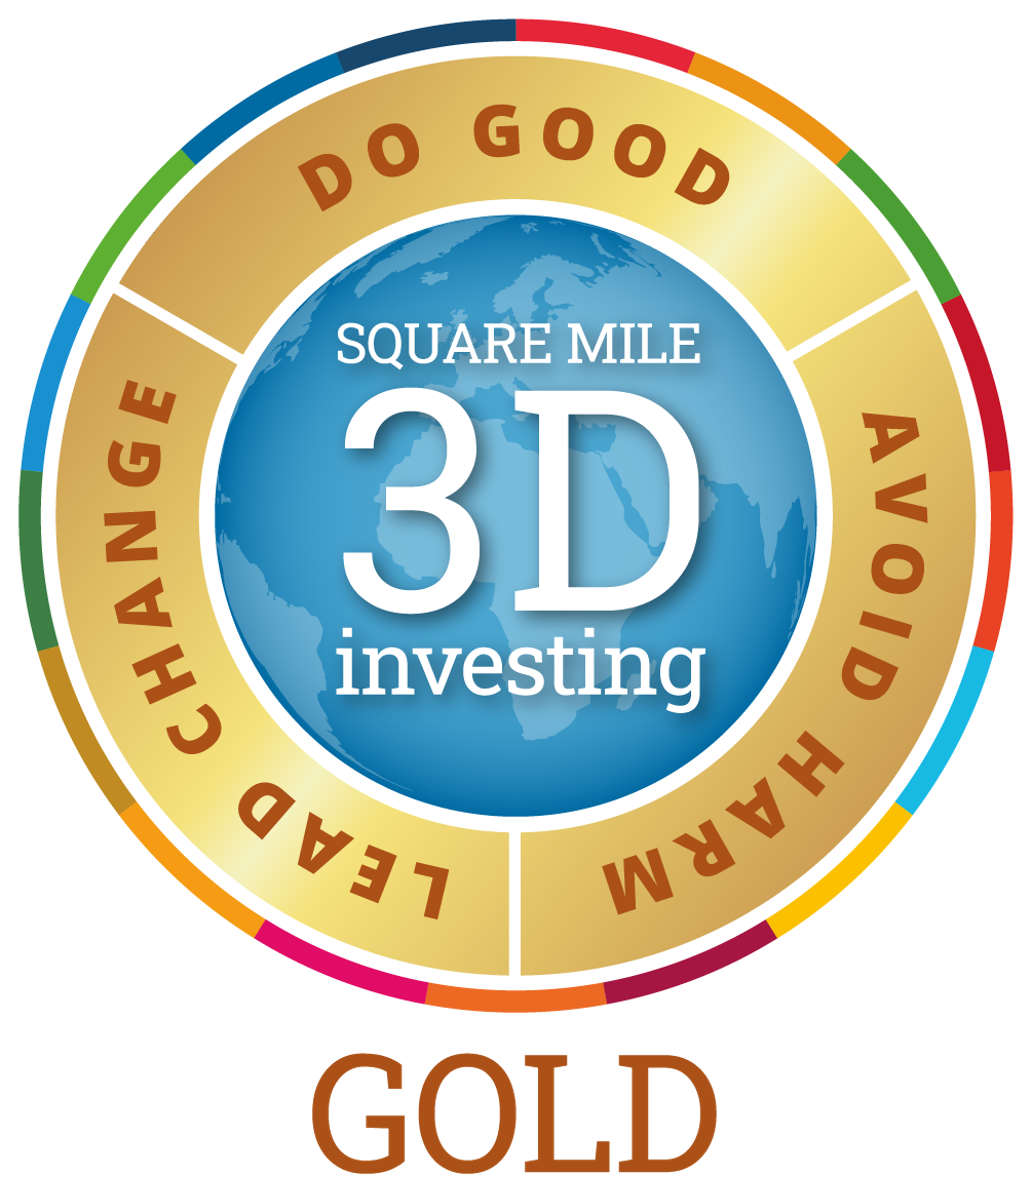 3D investing - gold rated